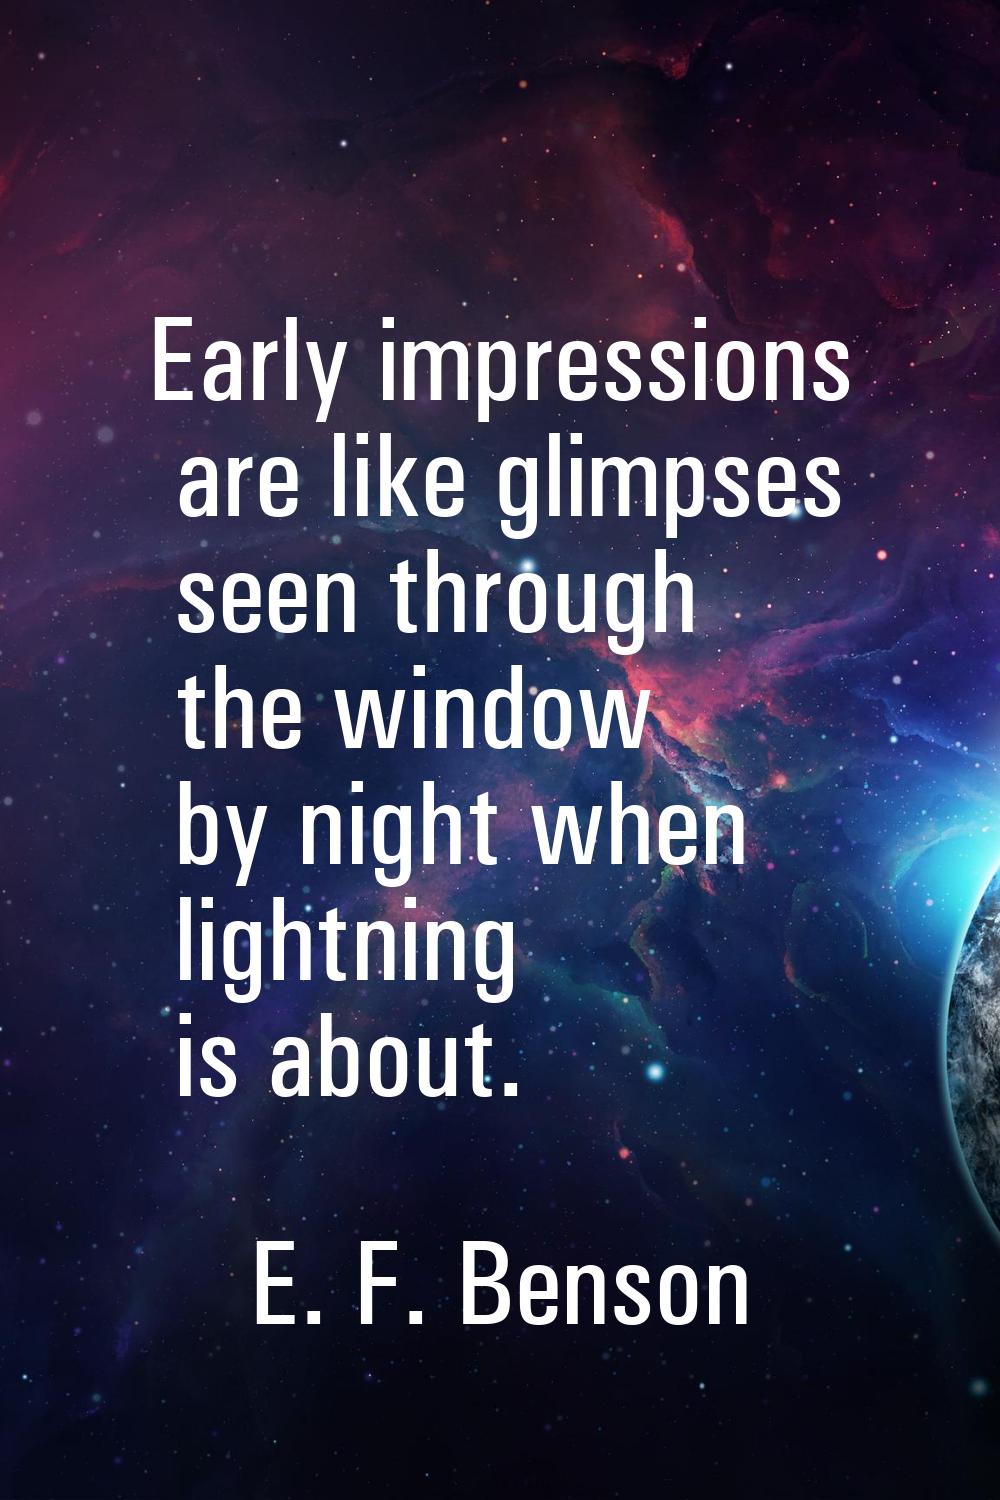 Early impressions are like glimpses seen through the window by night when lightning is about.